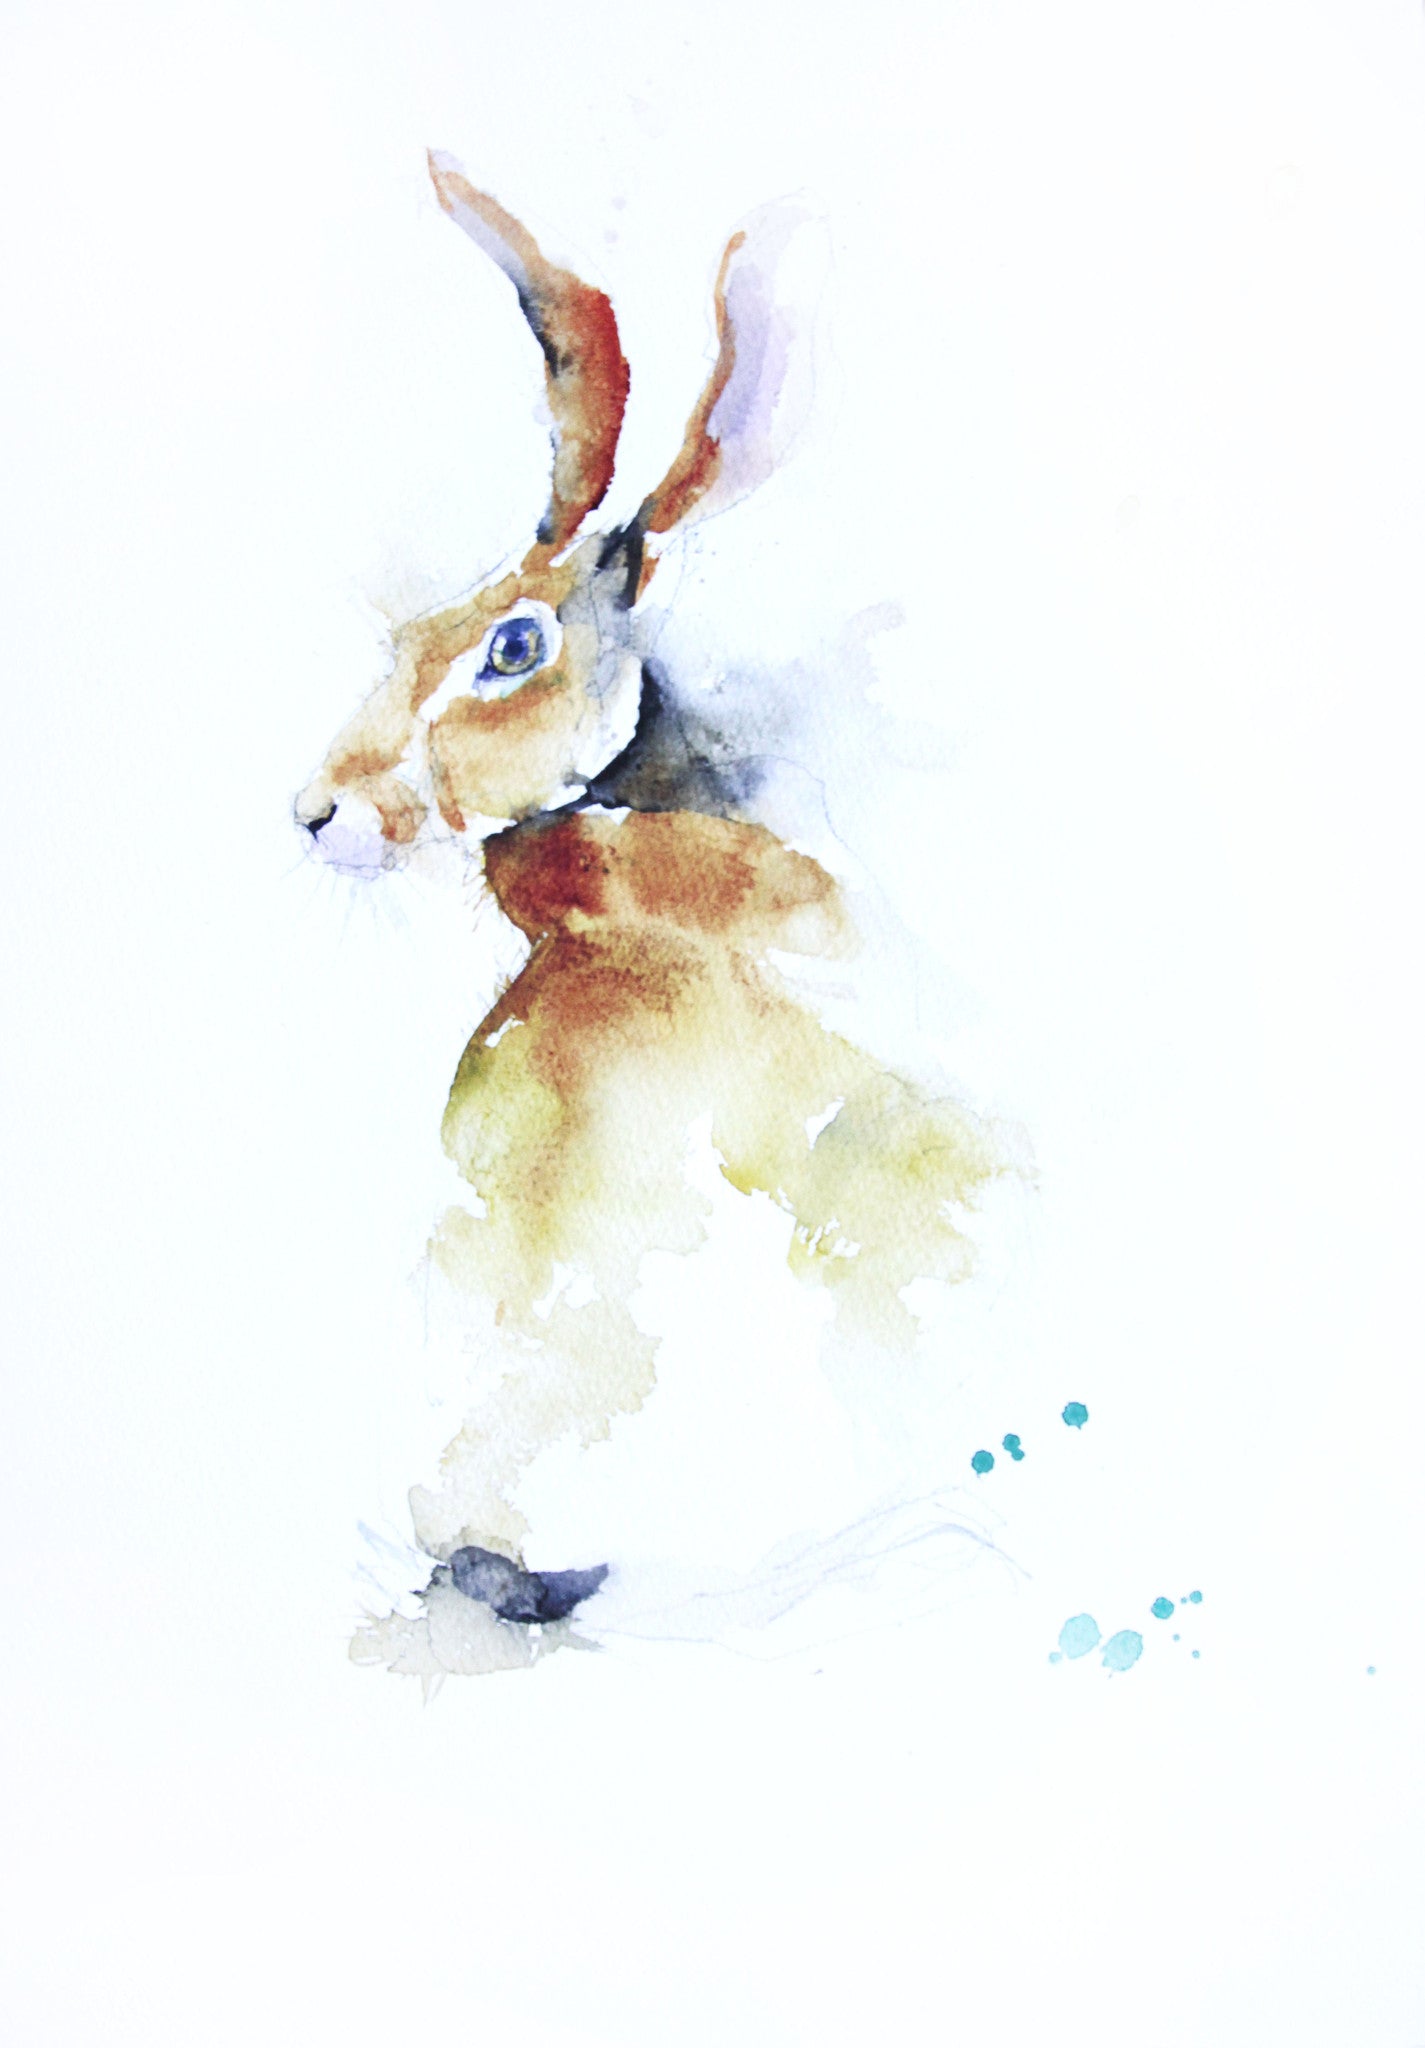 JEN BUCKLEY signed PRINT of my original HARE watercolour painting Large A3   - Jen Buckley Art limited edition animal art prints